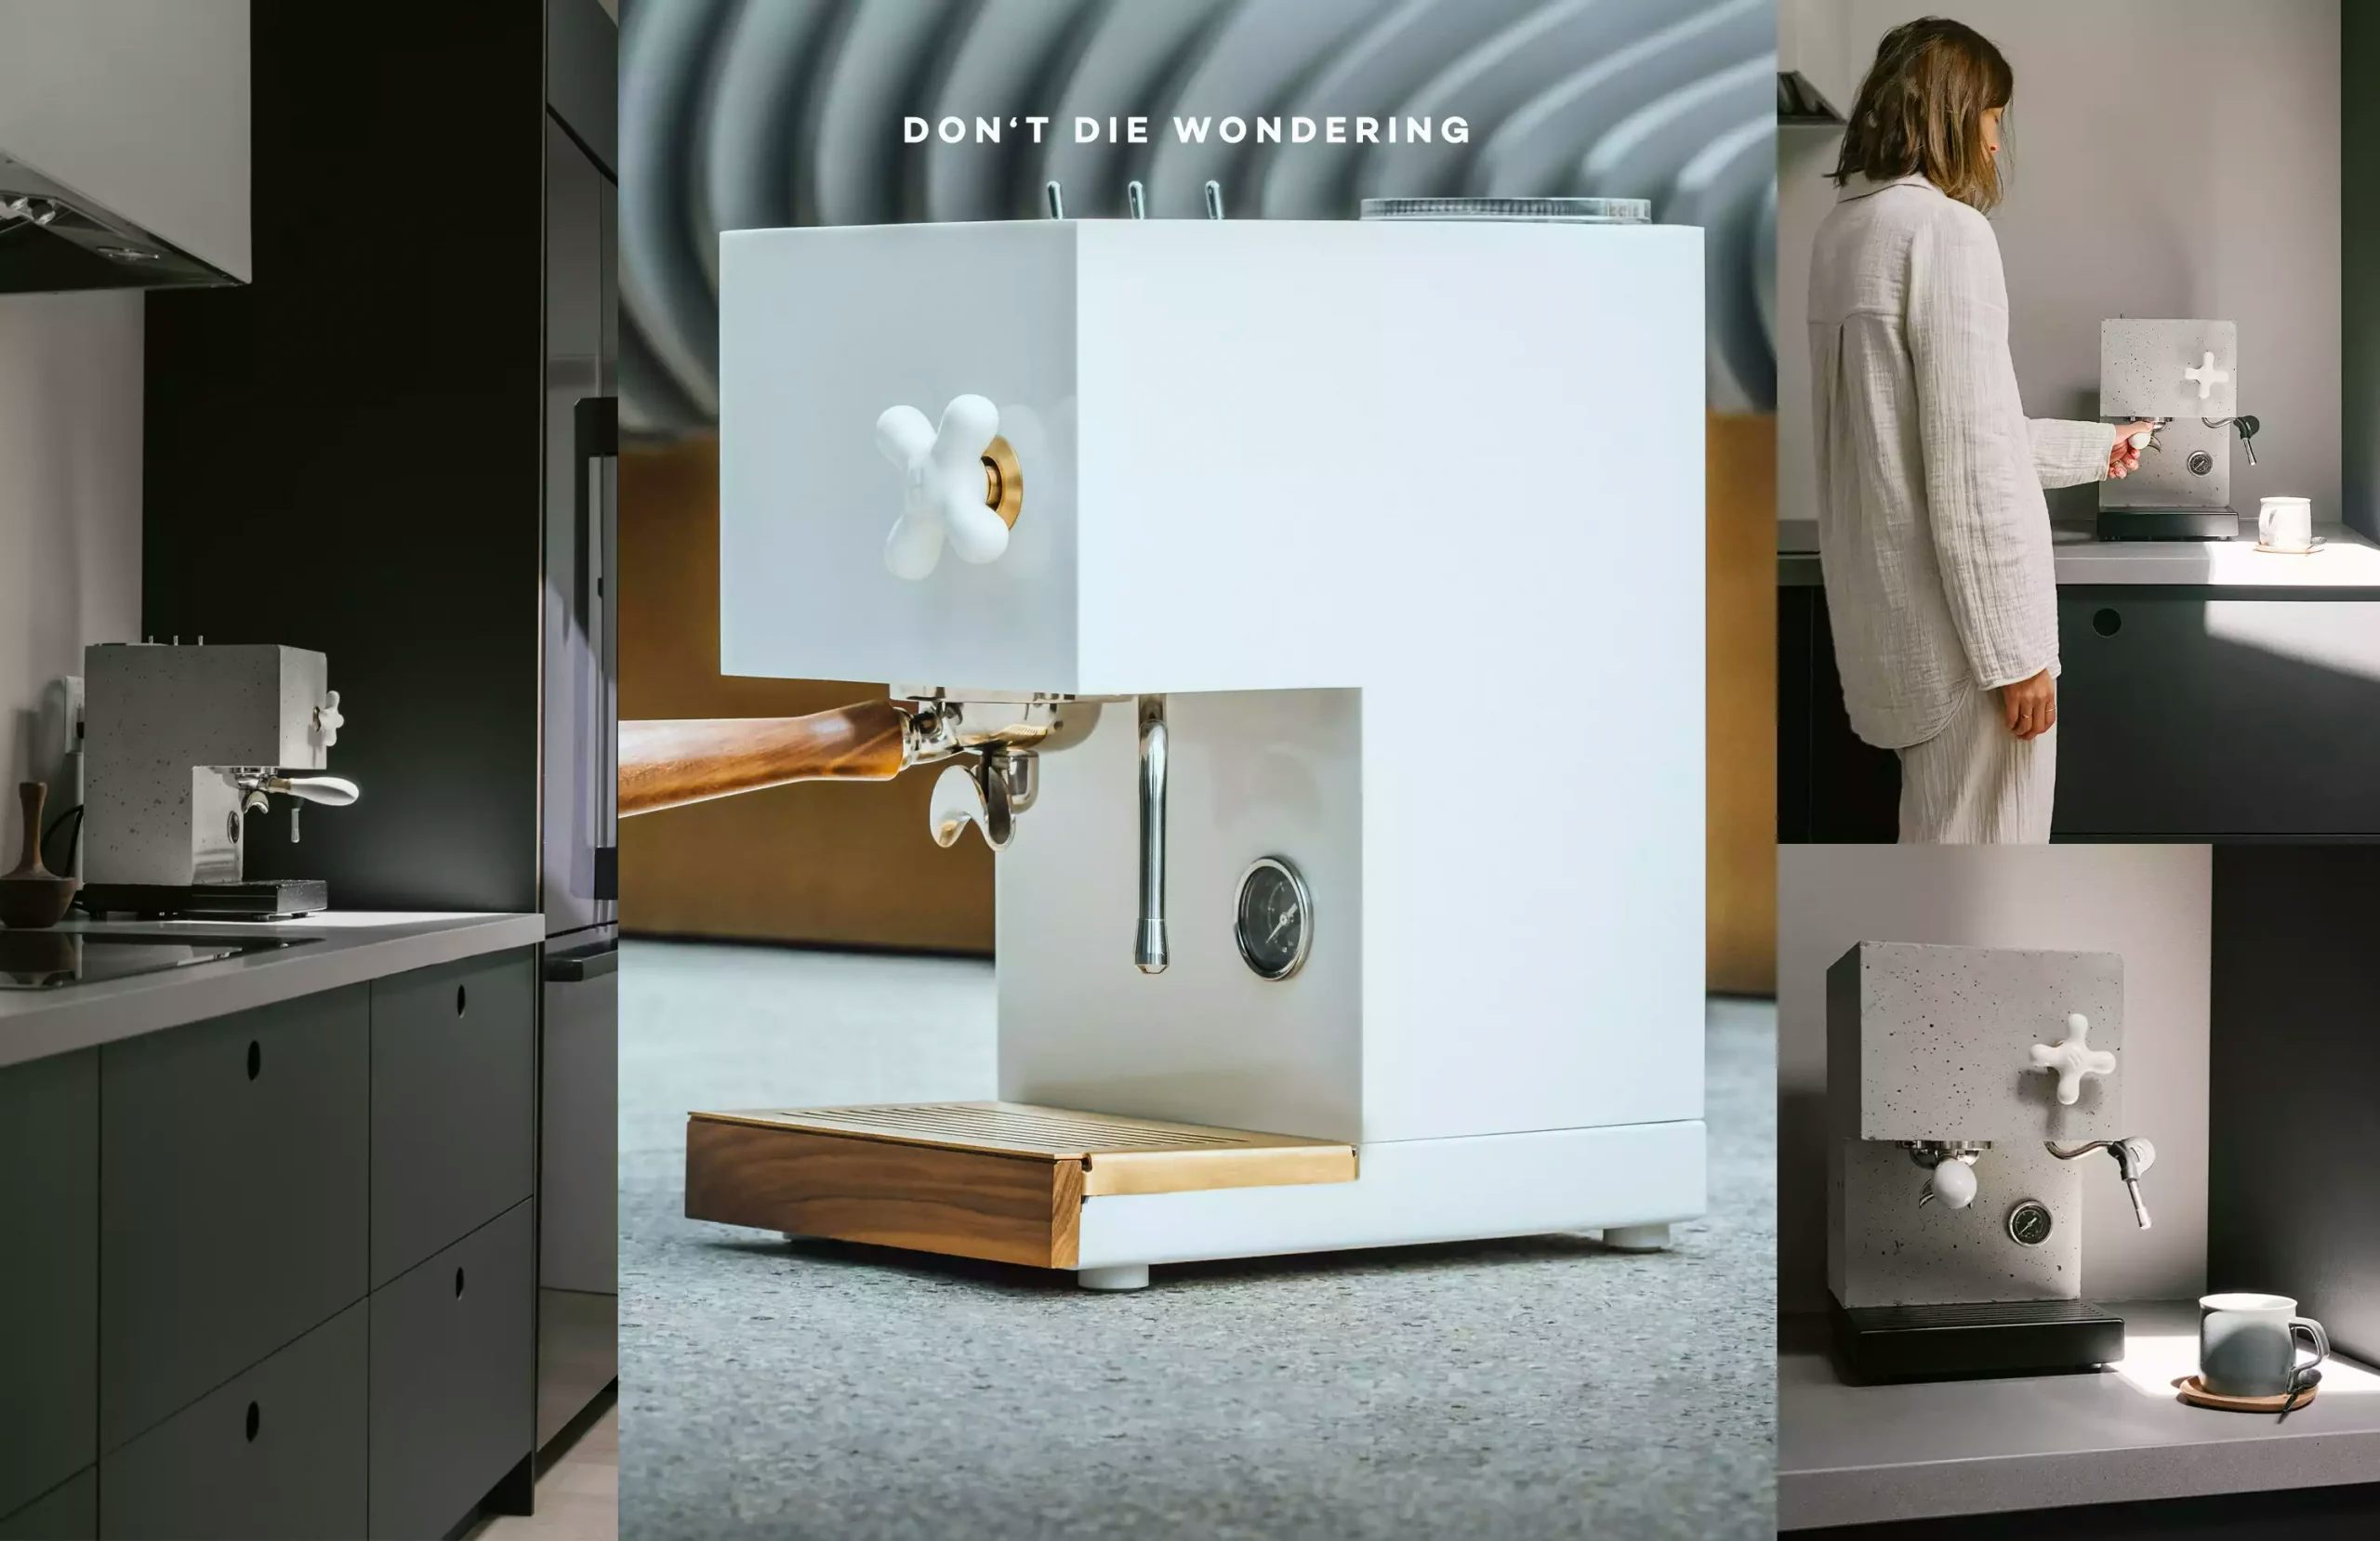 AnZa Wants You To Treat Your Coffee Machine Like a Sculpture